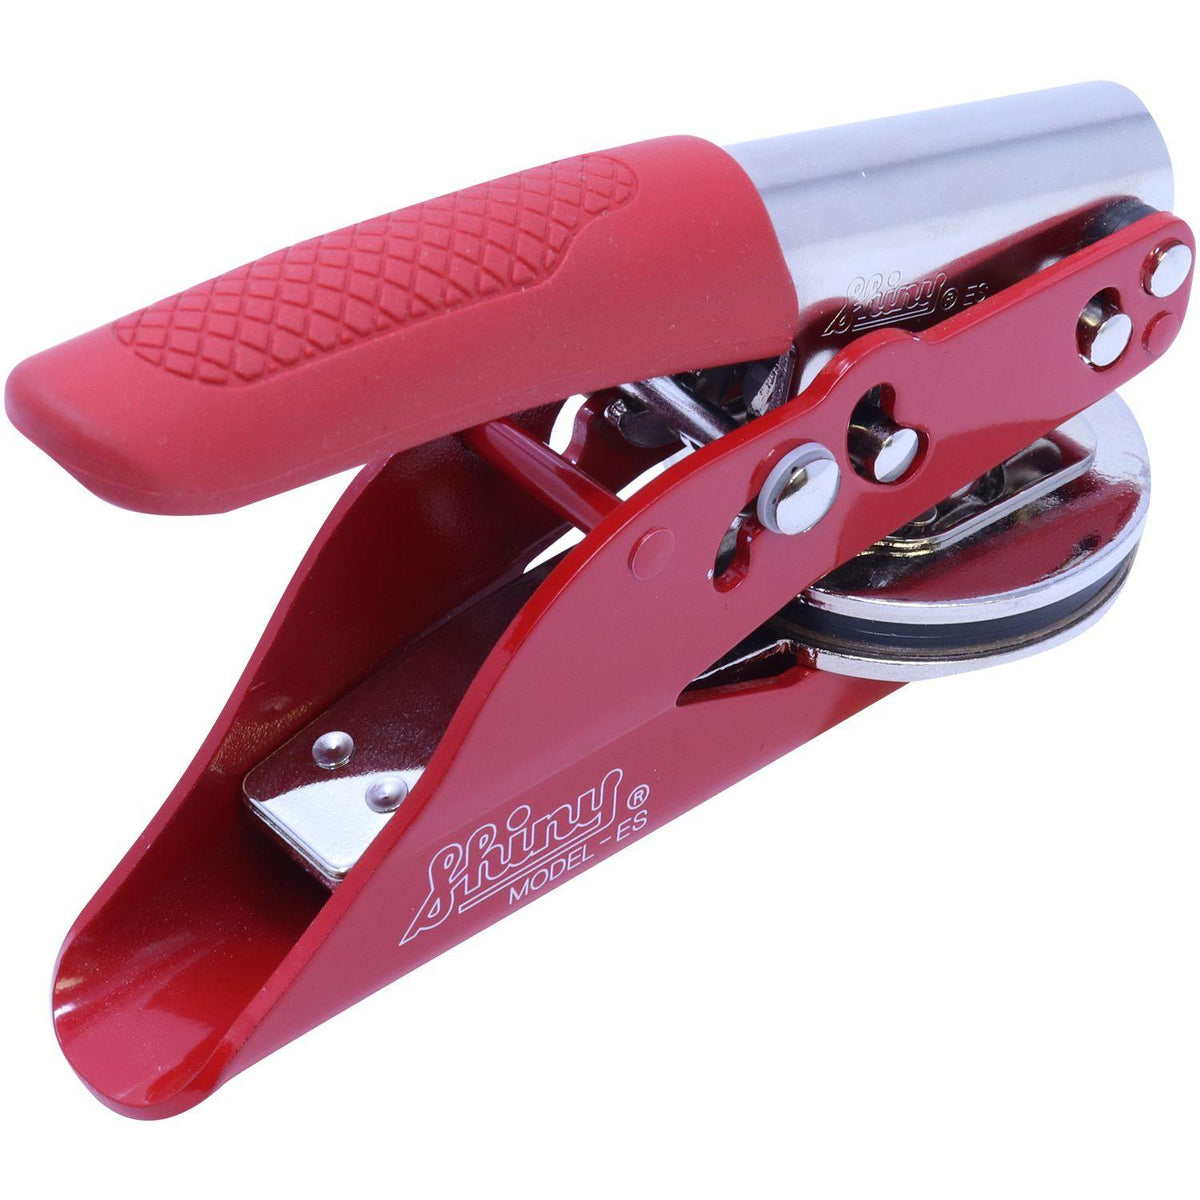 Public Weighmaster Red Soft Seal Embosser - Engineer Seal Stamps - Embosser Type_Handheld, Embosser Type_Soft Seal, Type of Use_Professional